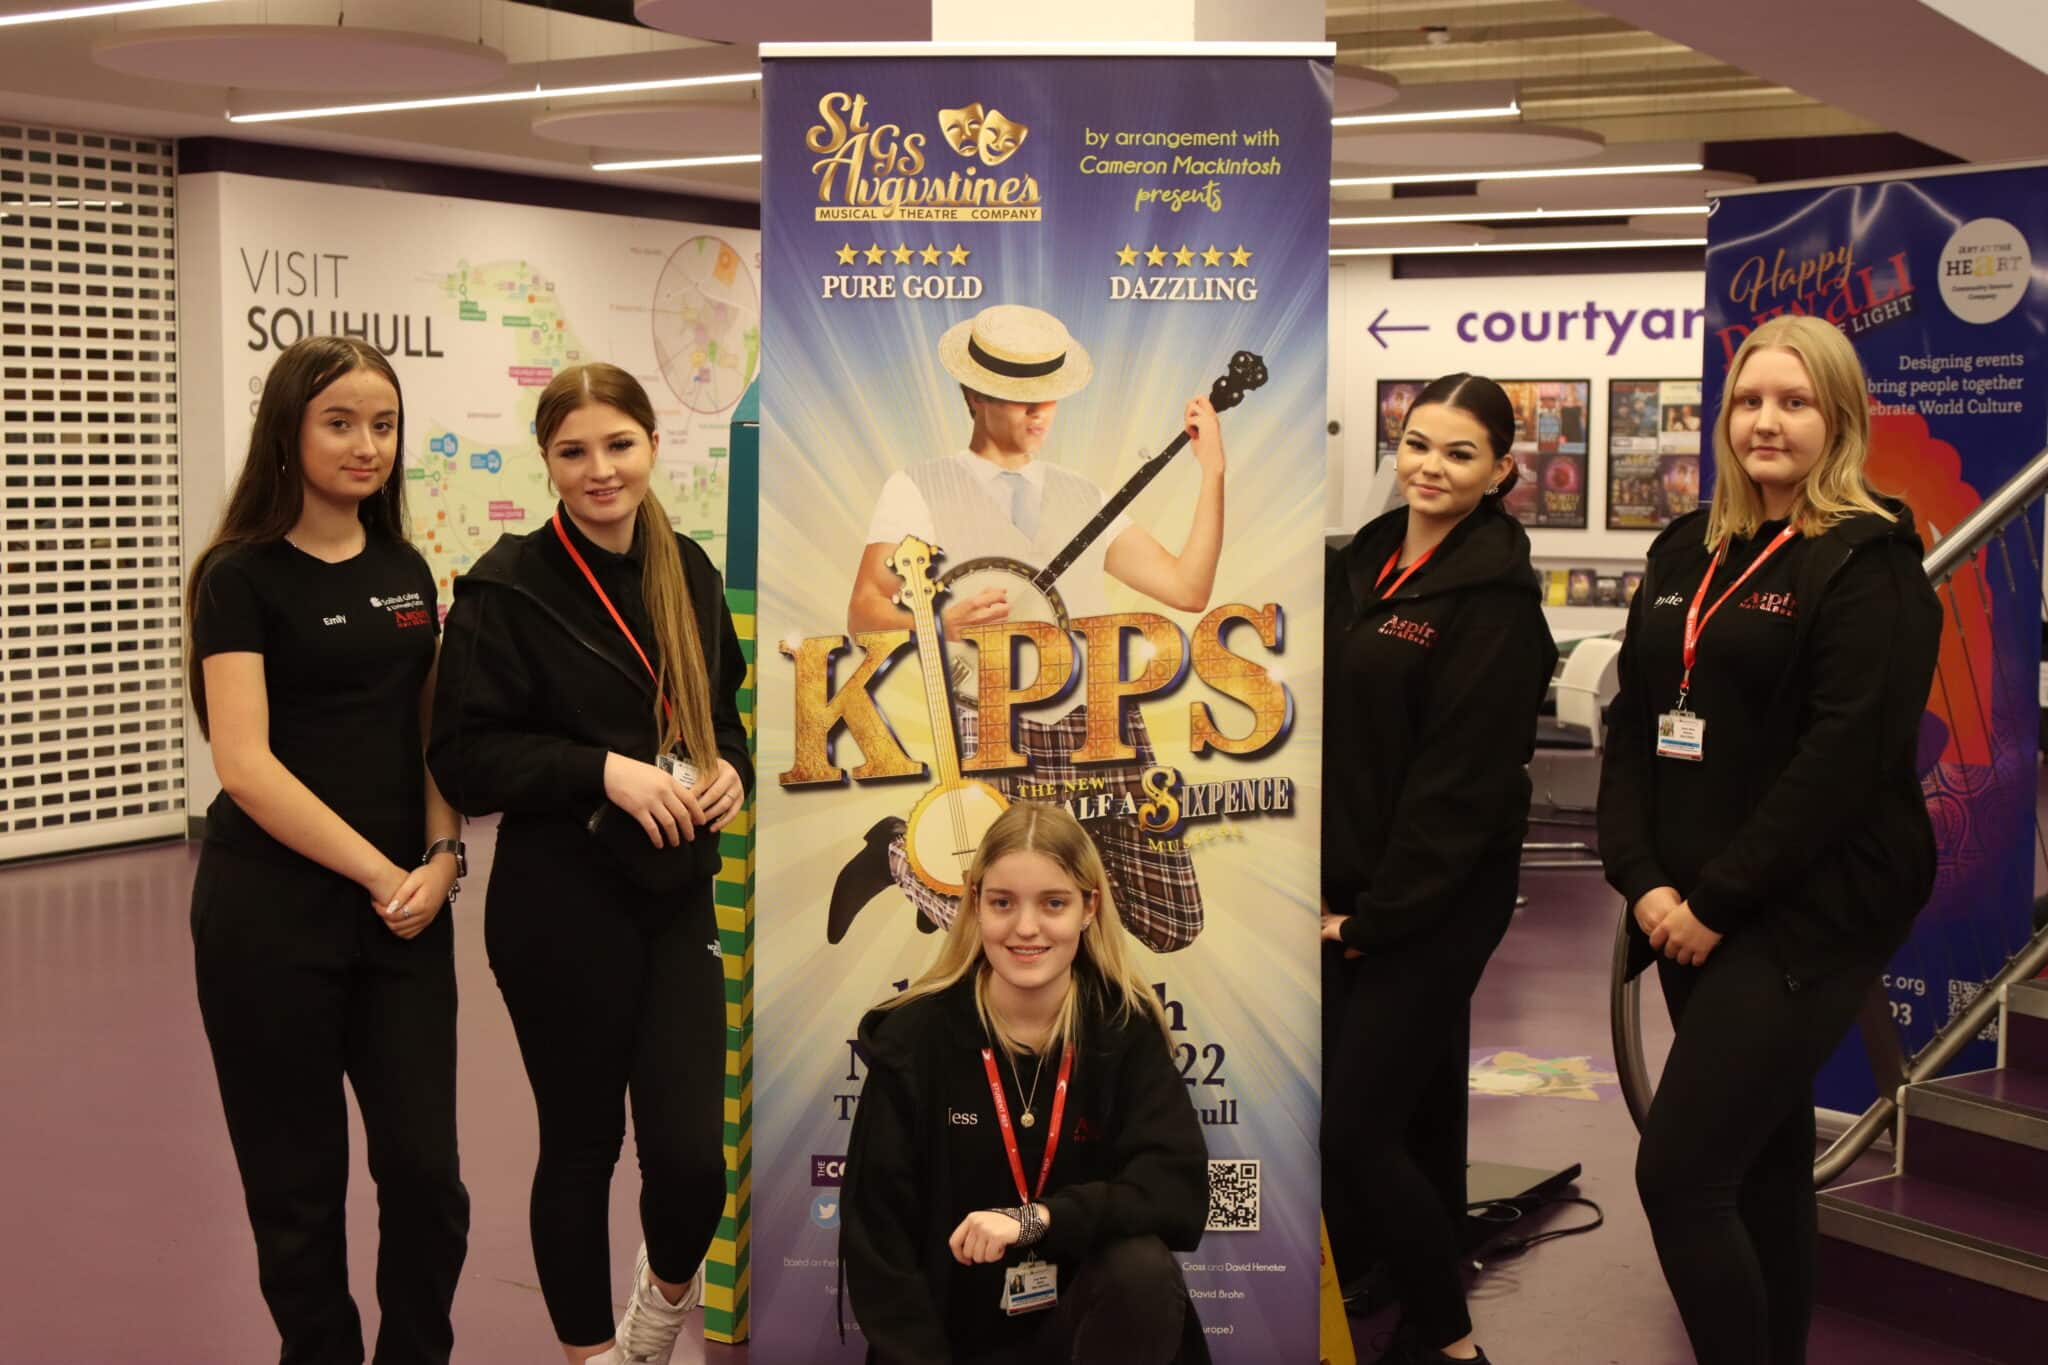 students wearing black standing in front of KIPPS promotional banner